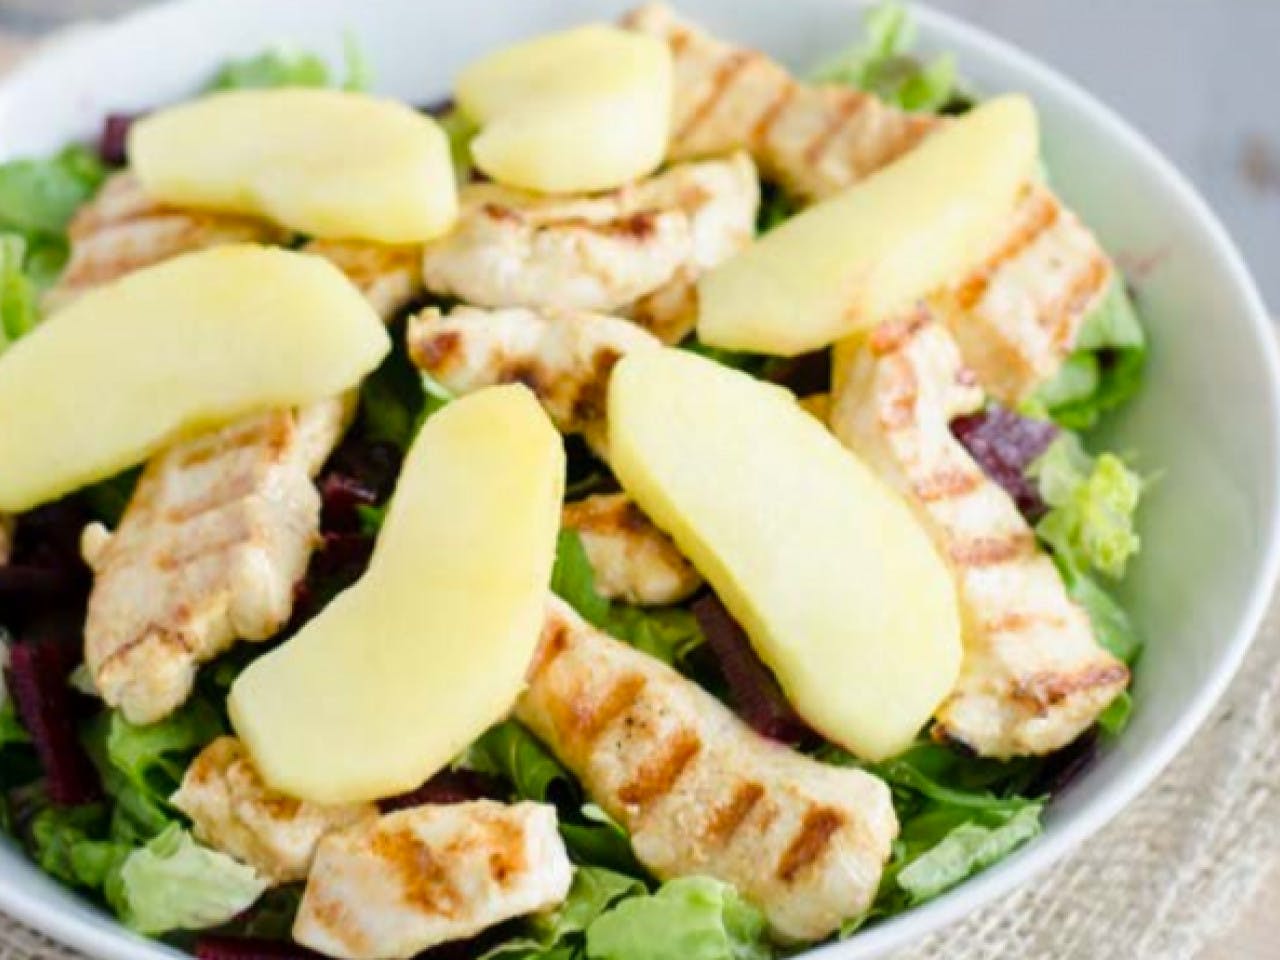 Winter salad with chicken, apple and red beets